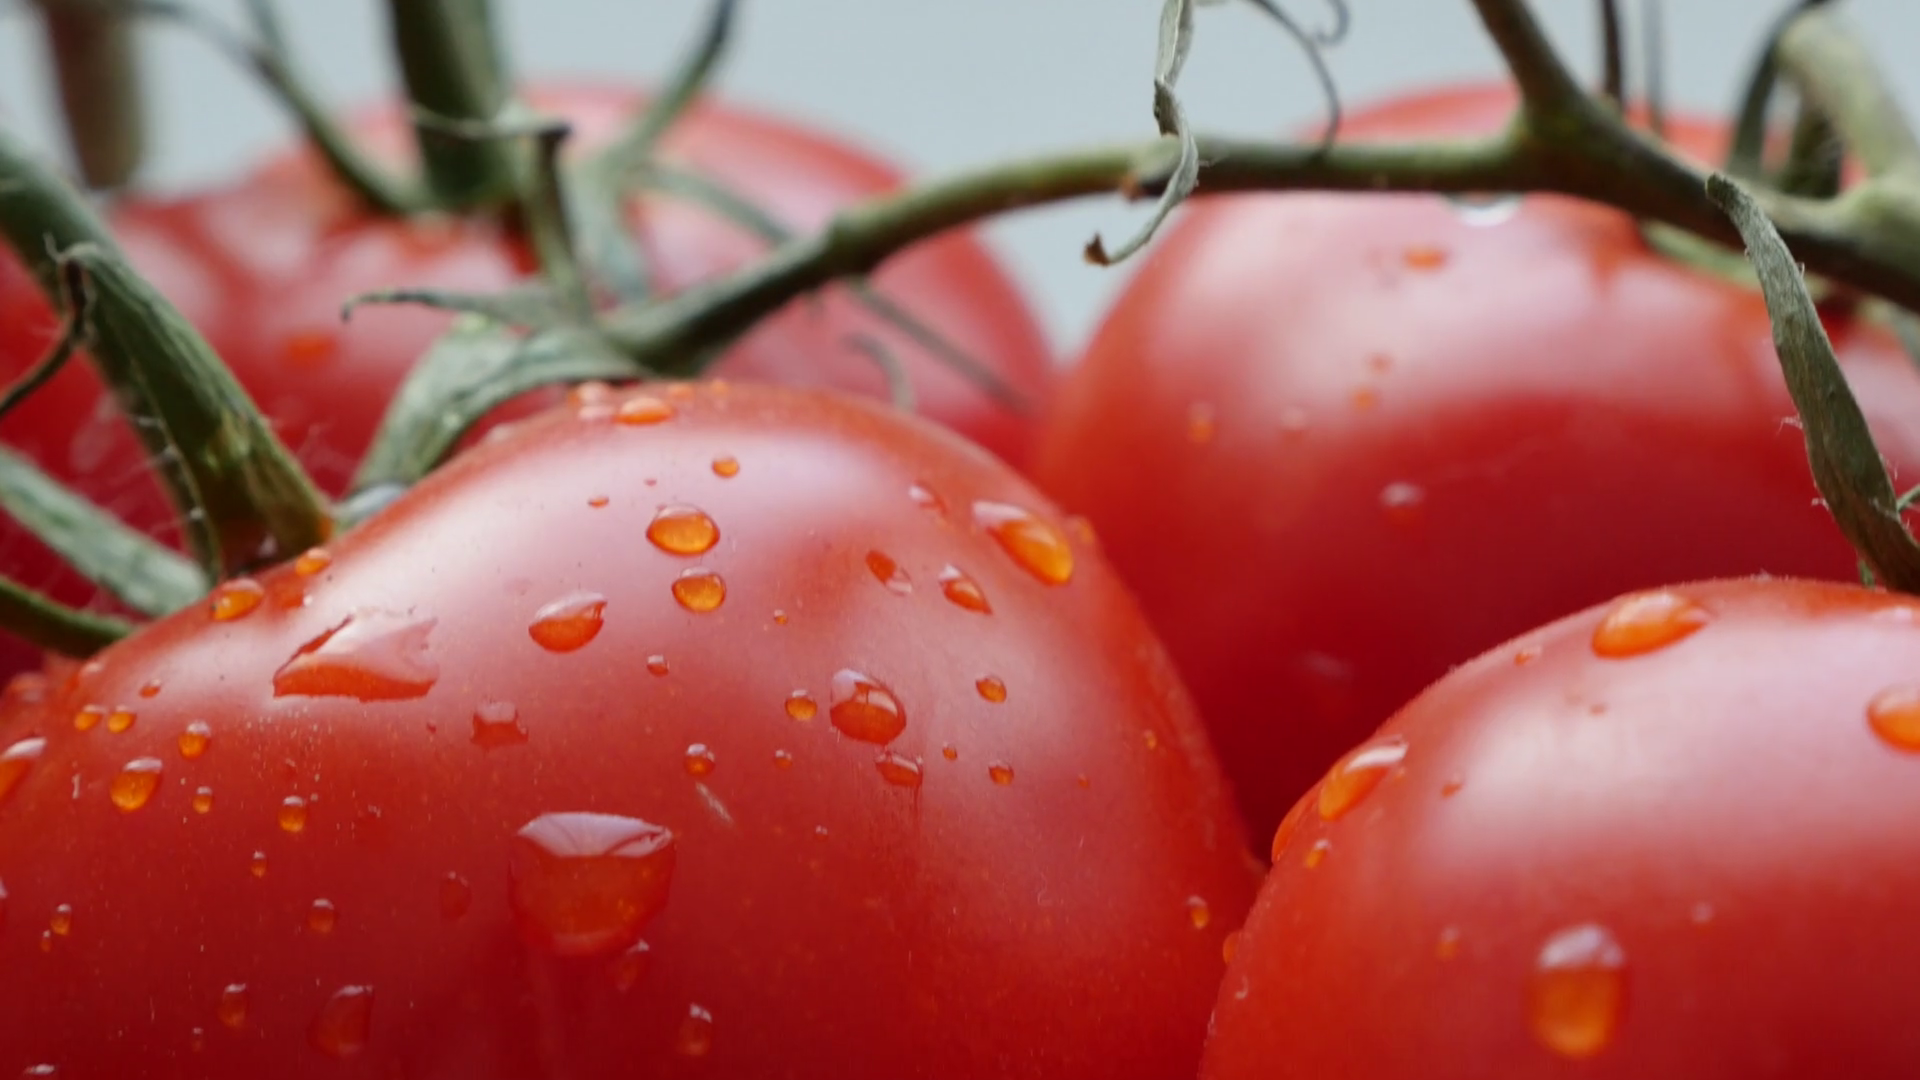 Fresh juicy red tomatoes on the vines slow tilting close-up 4K 2160p ...